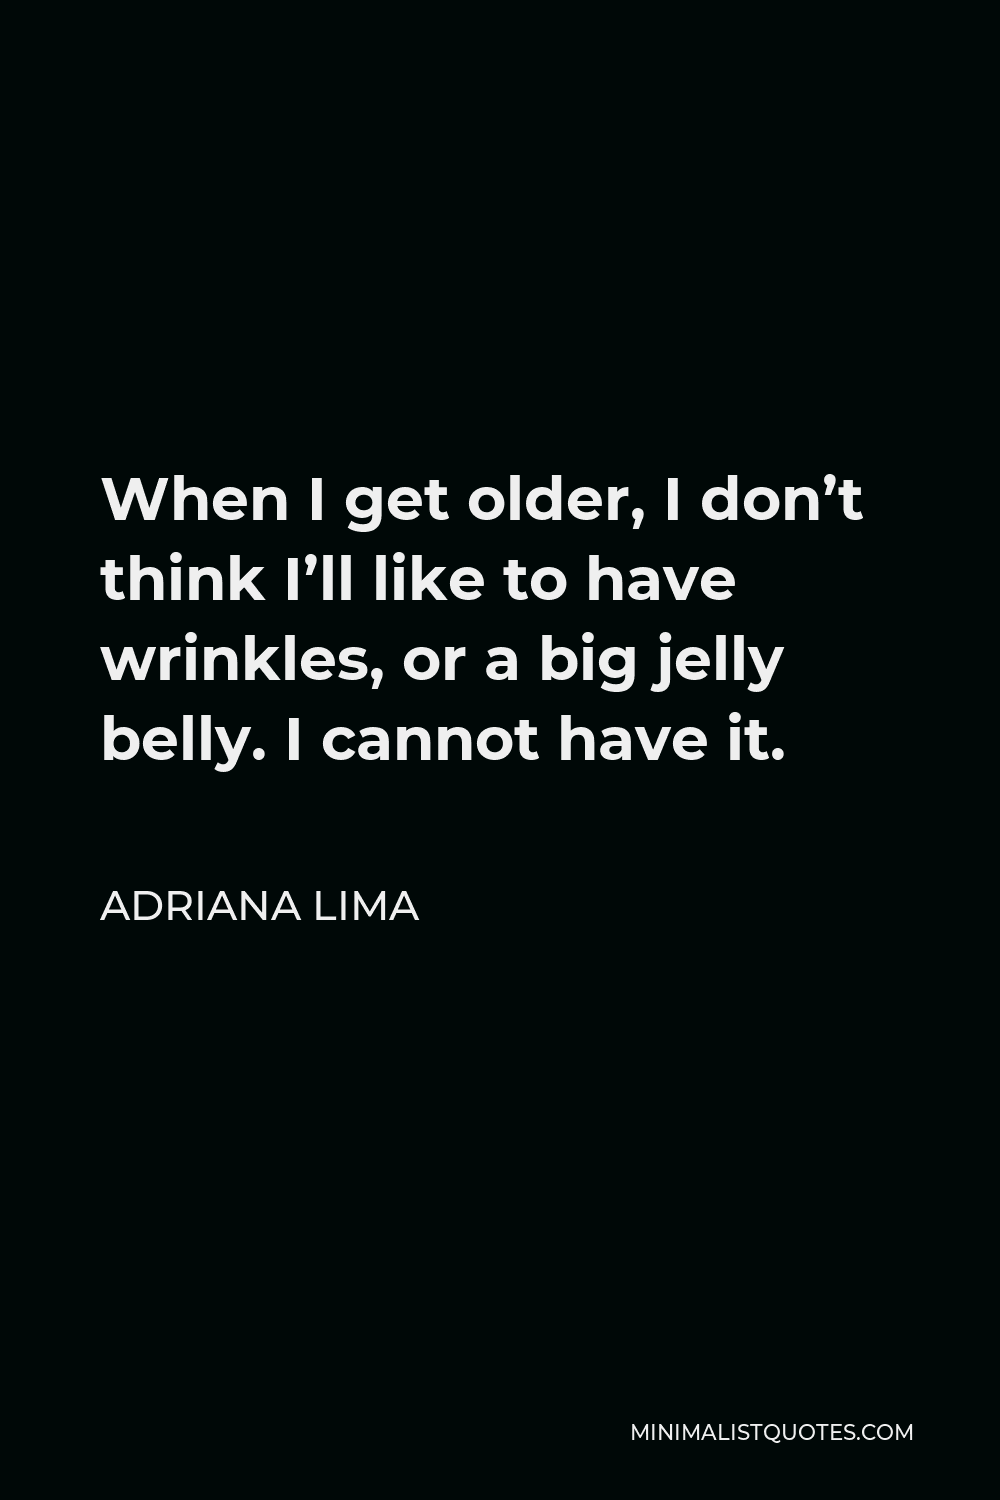 Adriana Lima Quote - When I get older, I don’t think I’ll like to have wrinkles, or a big jelly belly. I cannot have it.